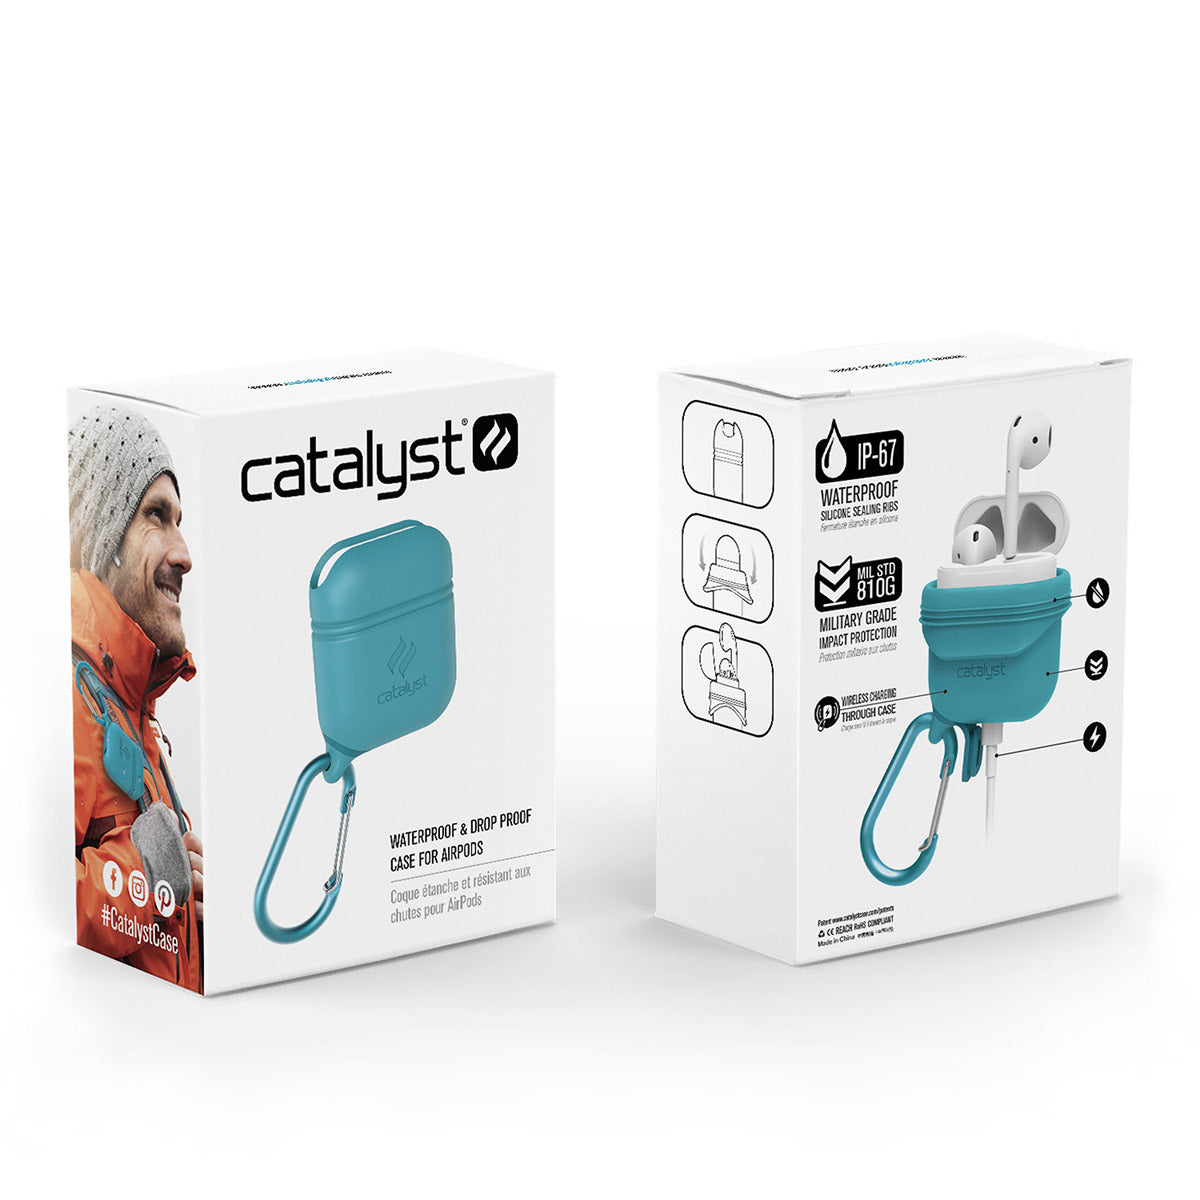 Catalyst Waterproof Case for Airpods Gen 1 & 2 special edition + carabiner showing the back and front of  the packaging